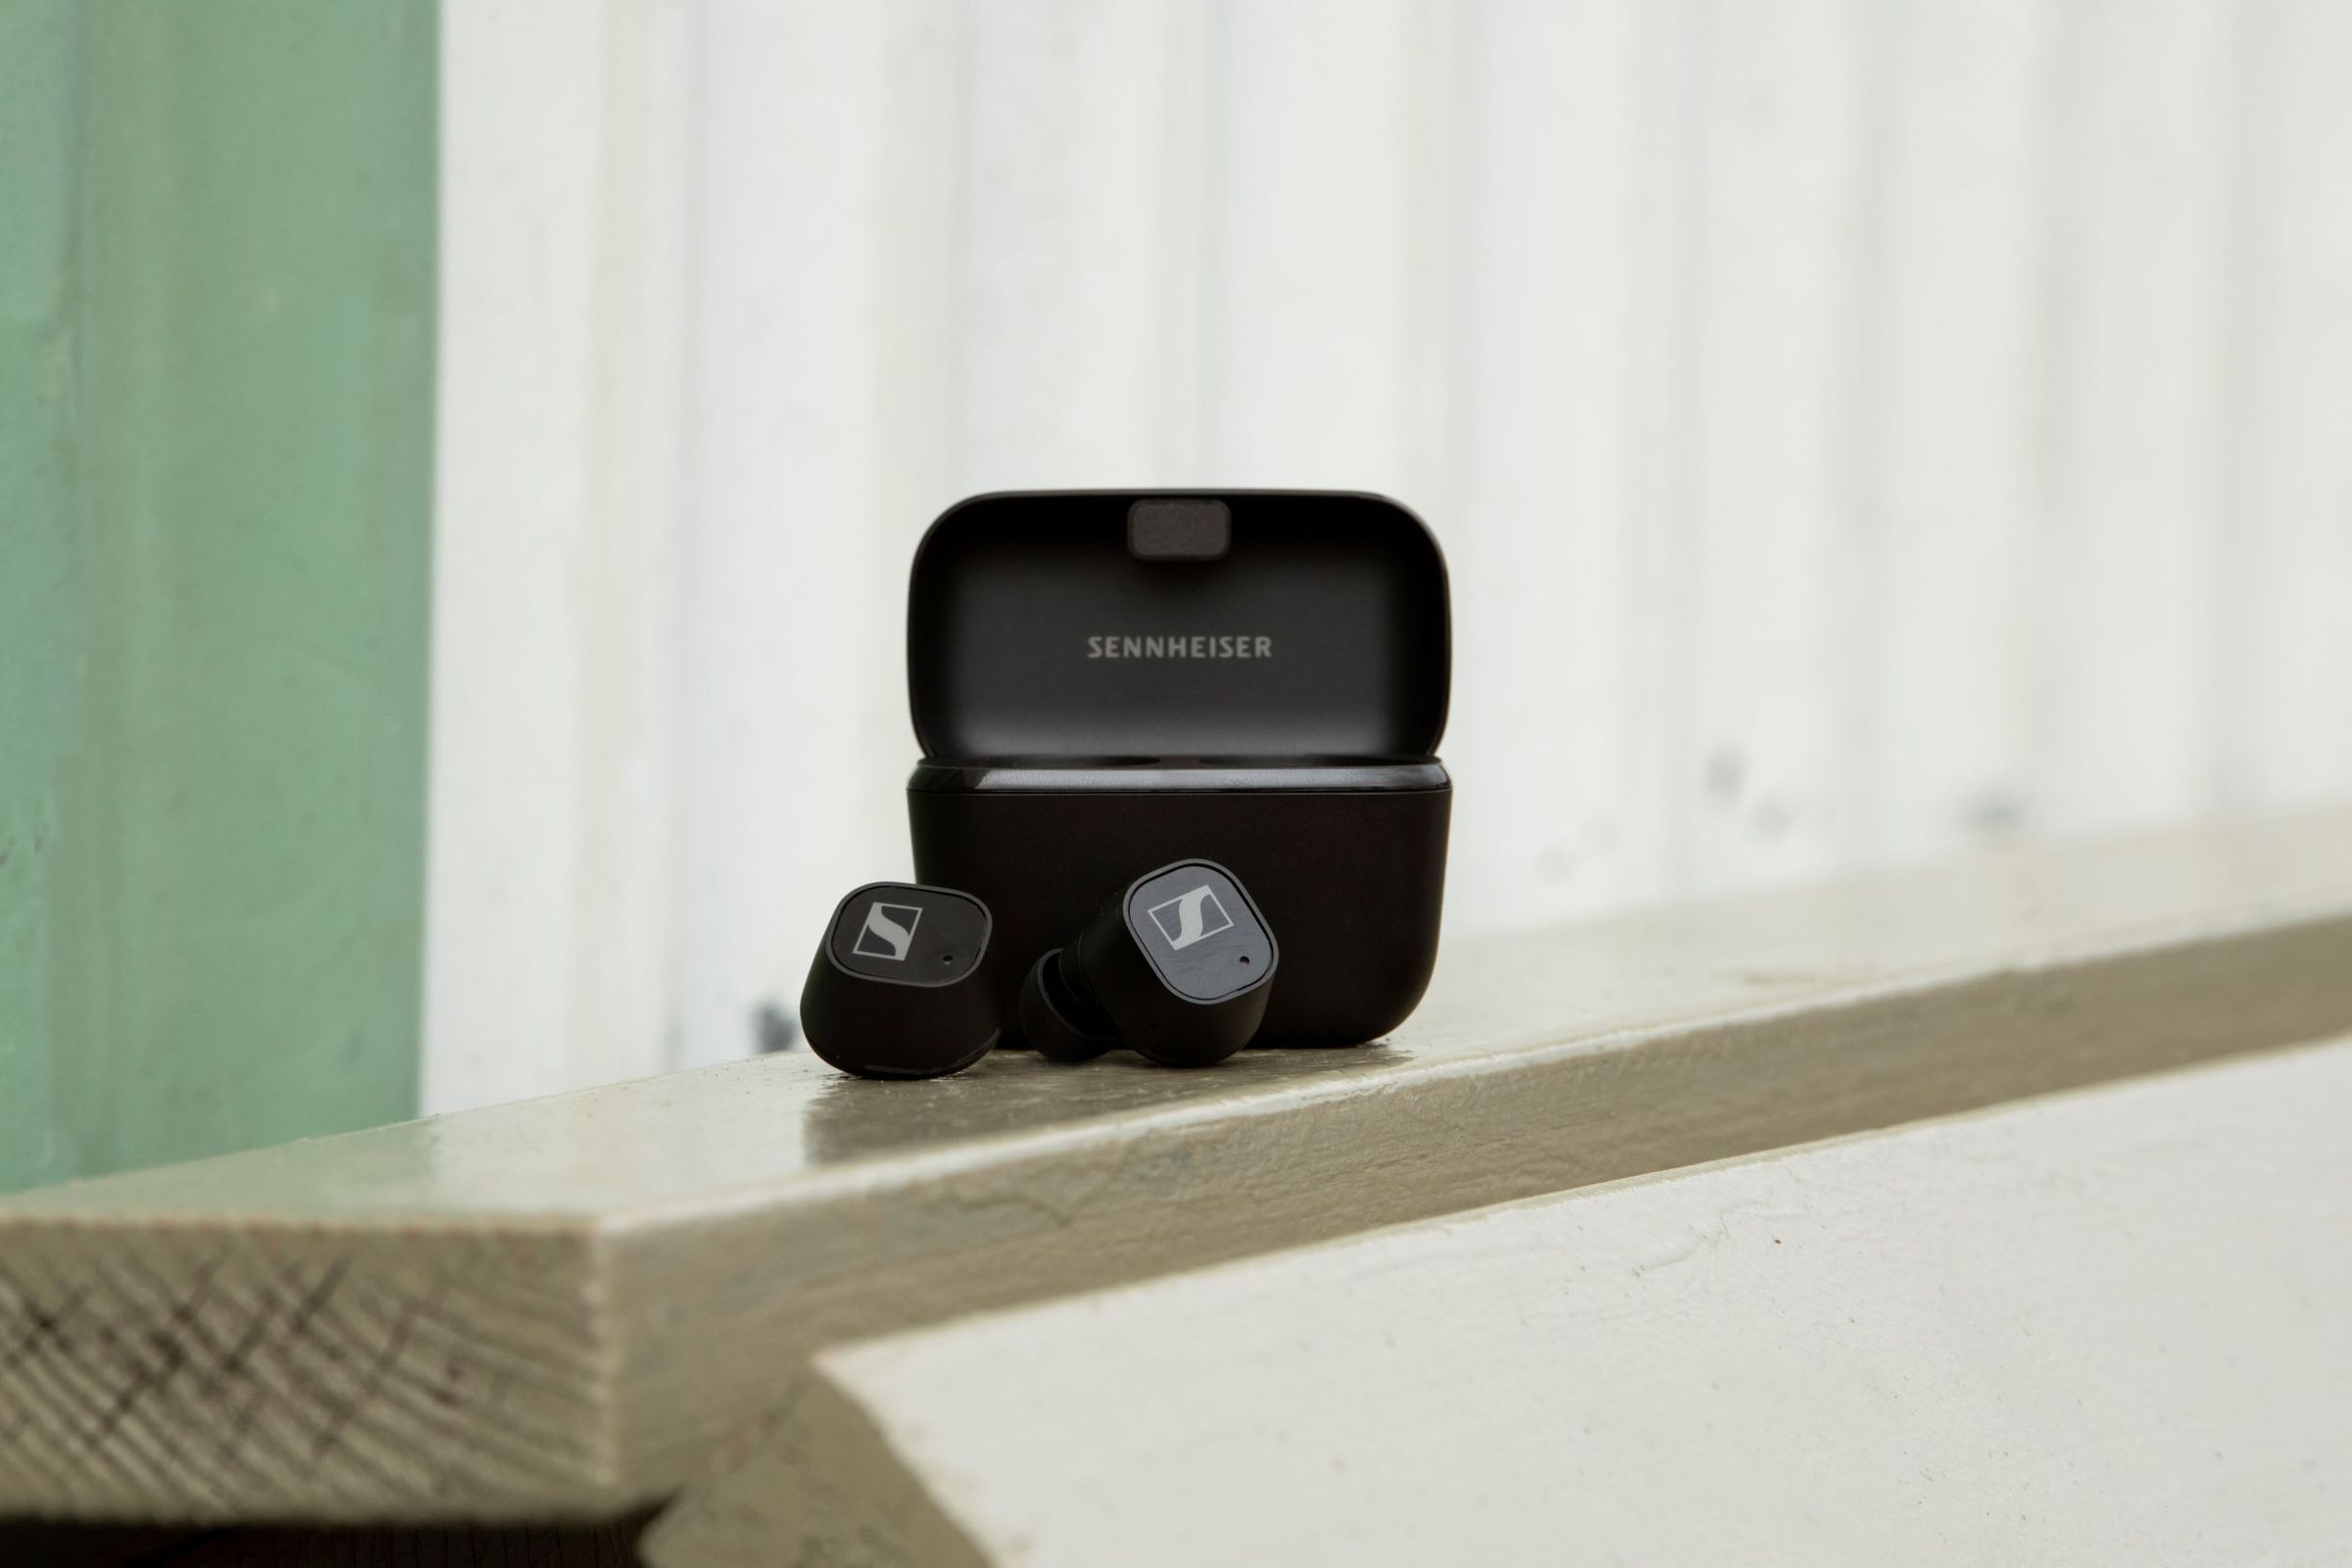 Combined with the charging case, the earbuds offer 24 hours of listening.